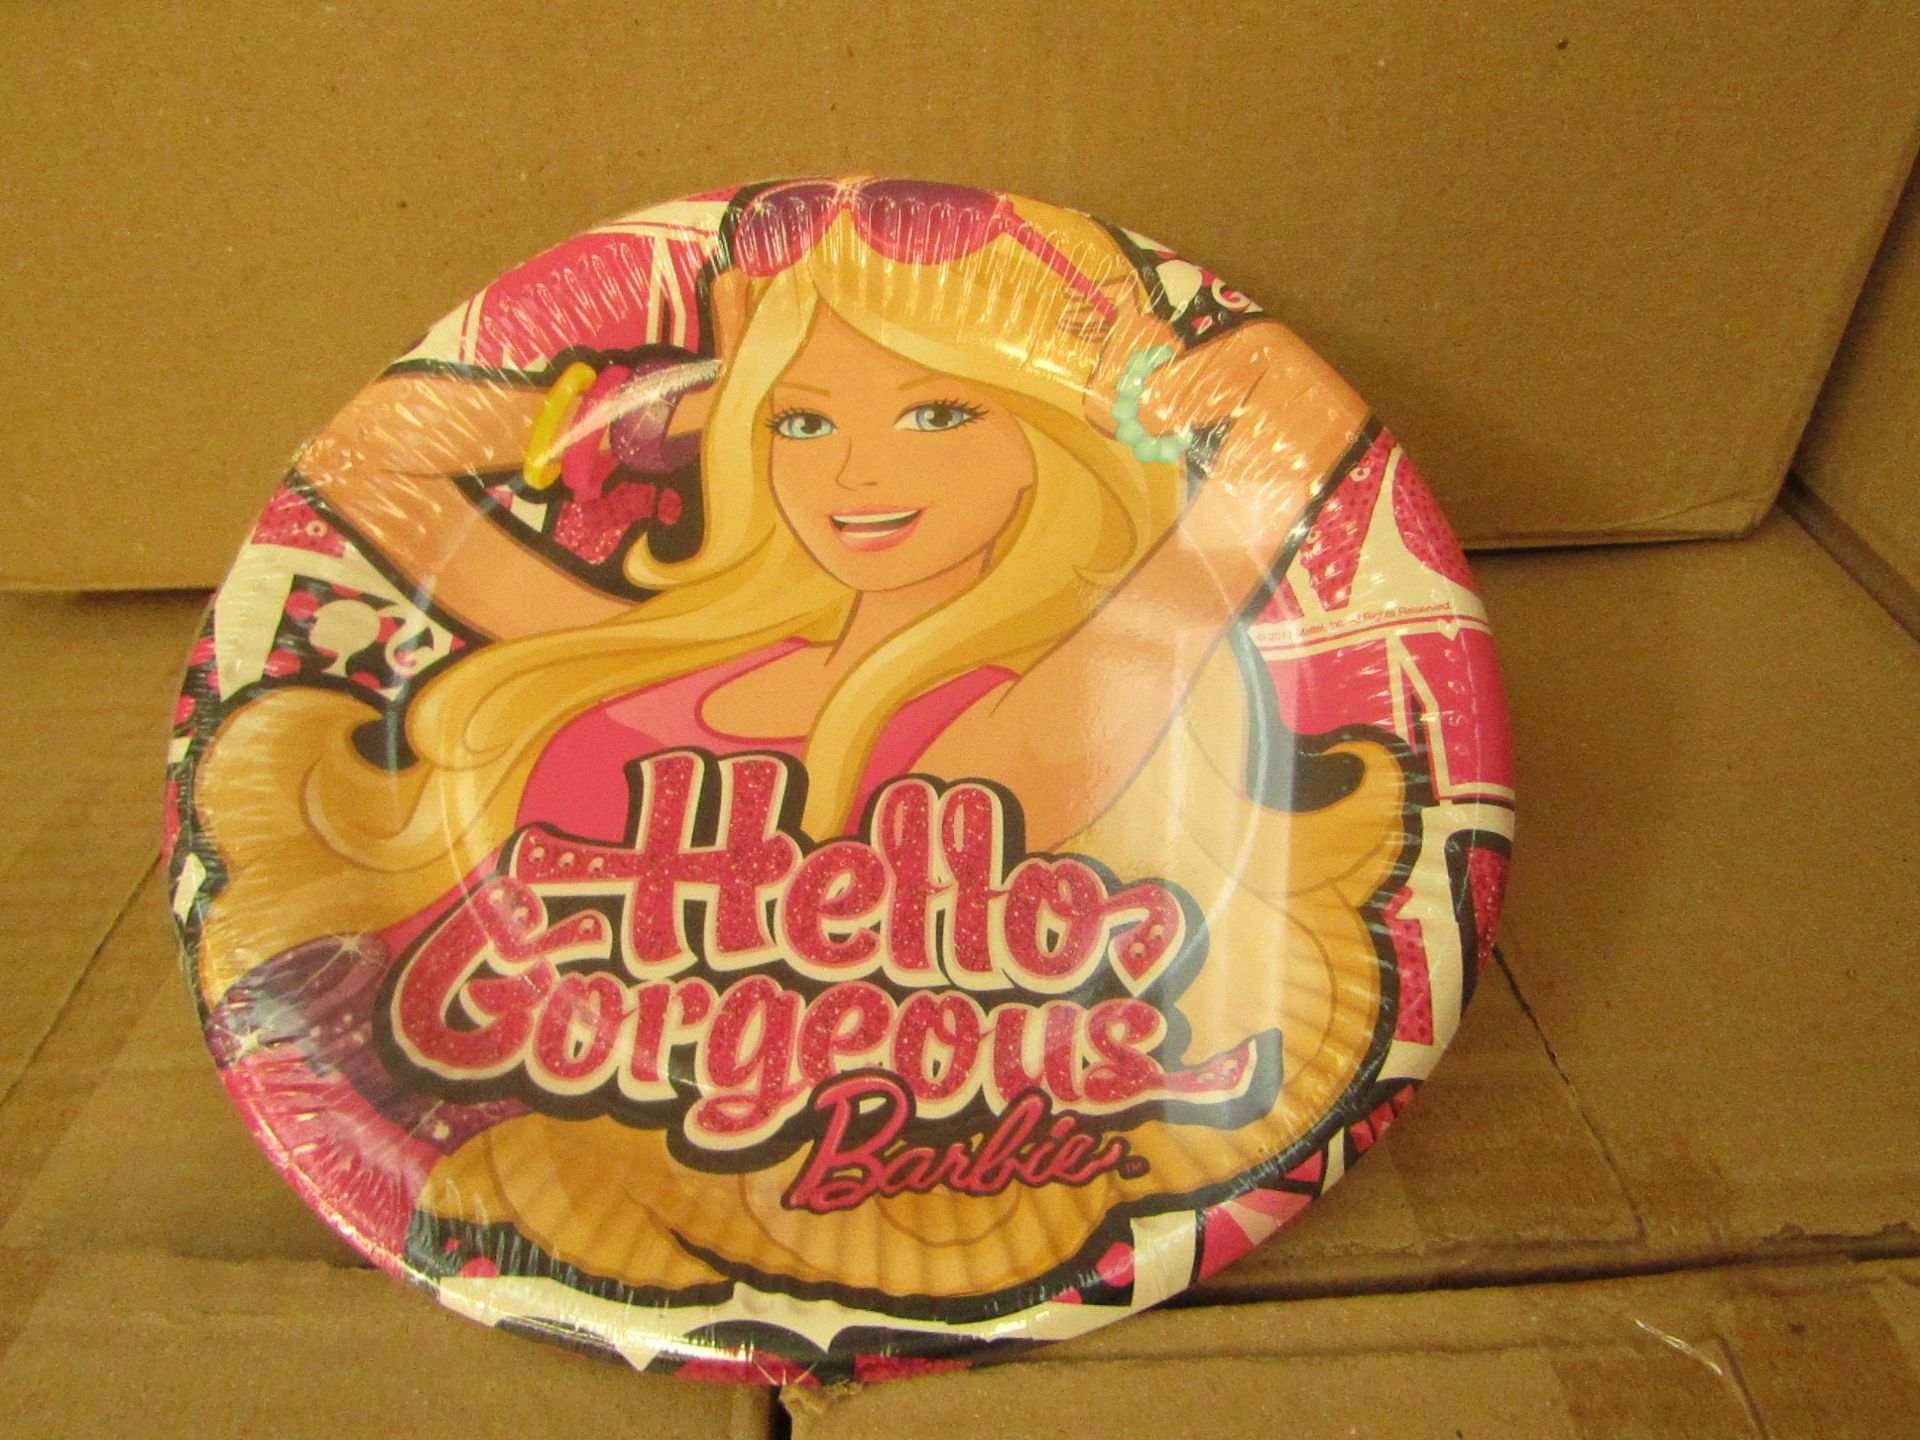 2x Box Of Barbie Plates, Each Box Contains 36 Plates - New & Boxed.